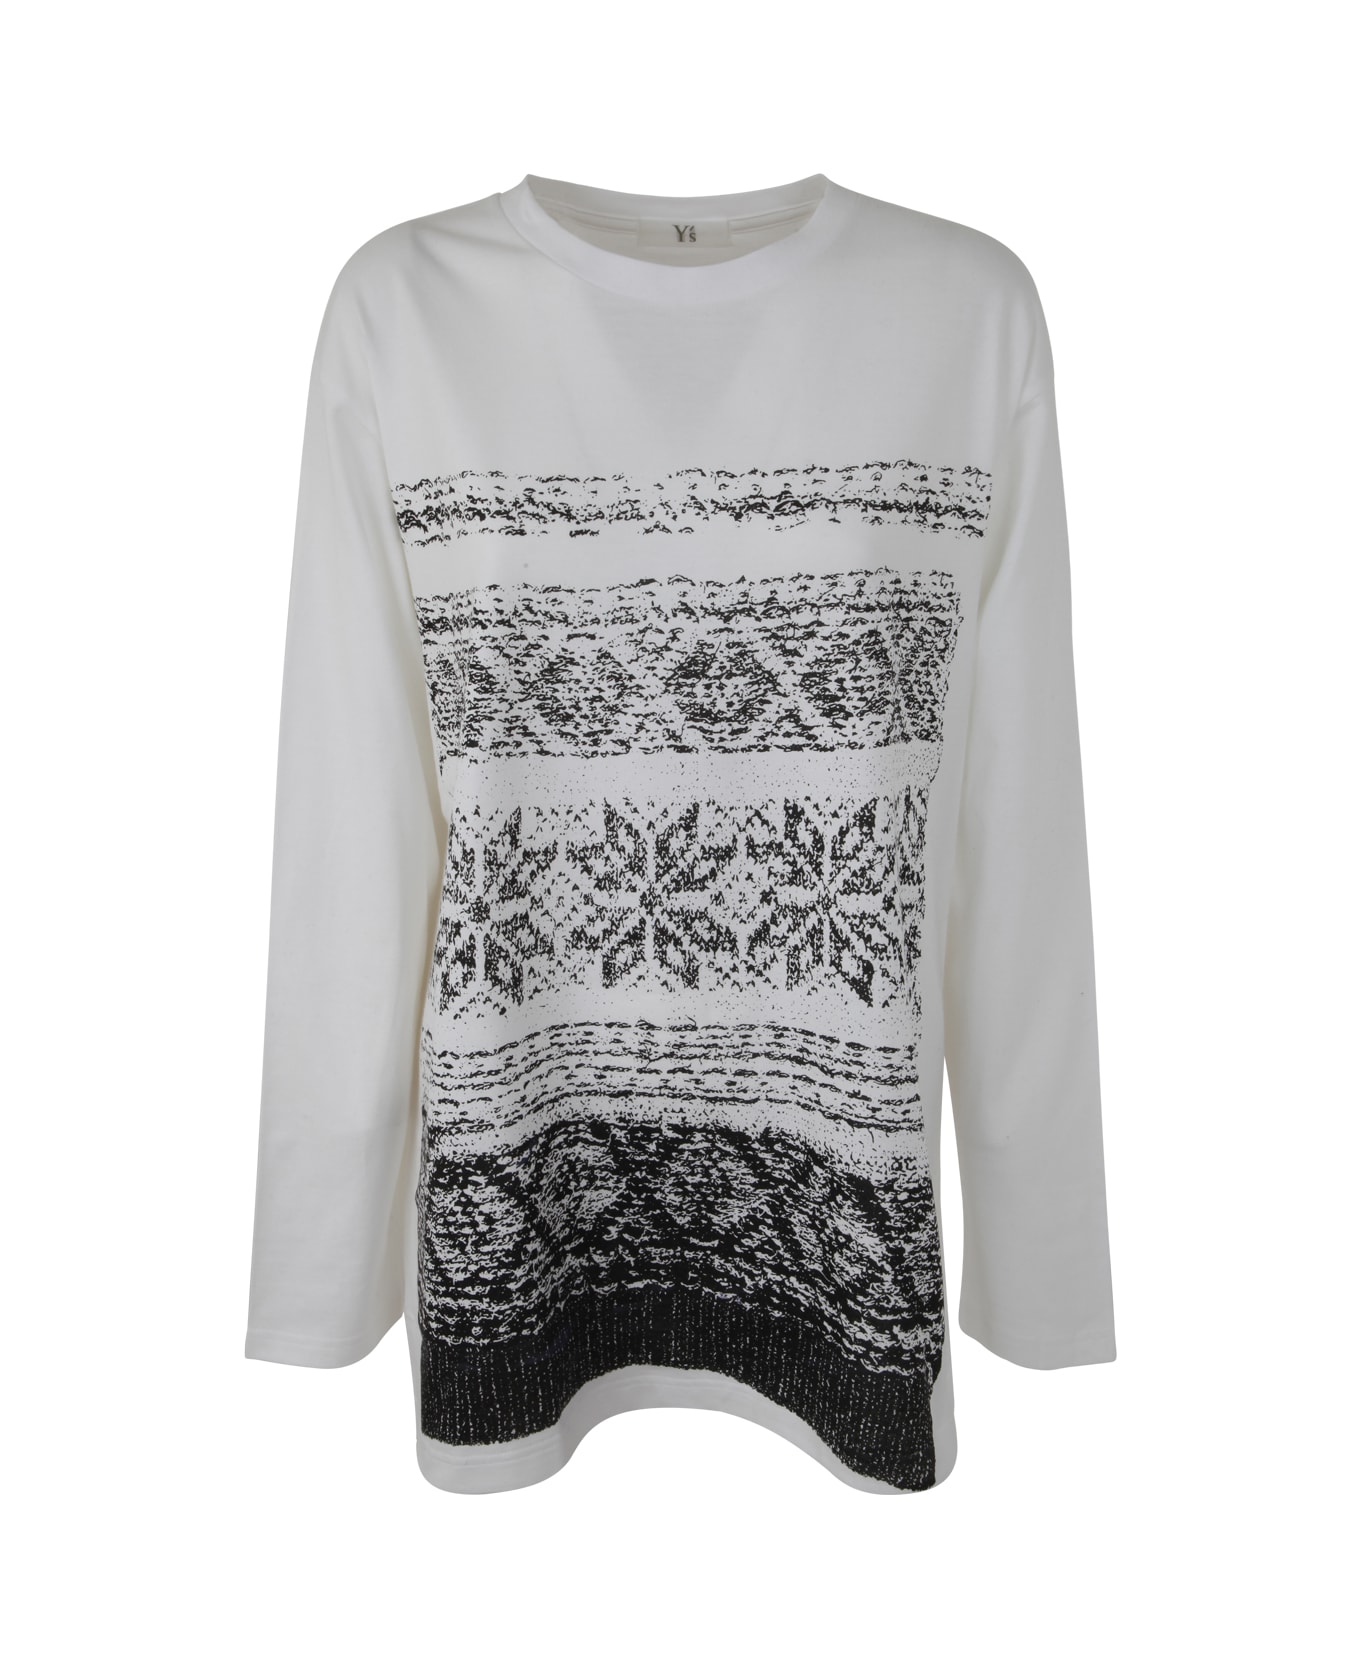 Y's Snow Pt Long Sleeves T - White